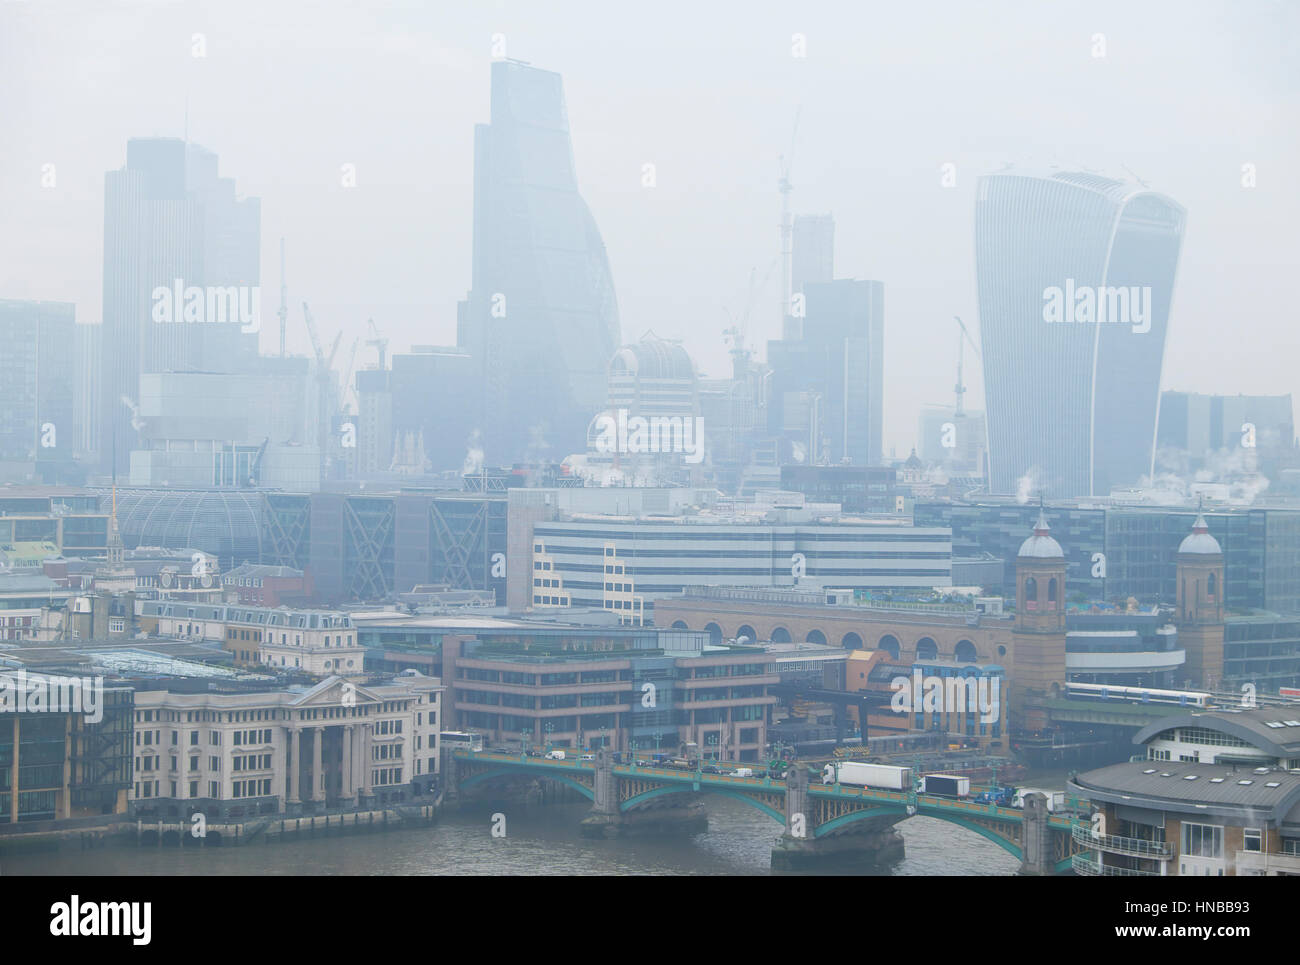 View of cityscape and air pollution over The City of London financial district skyscrapers buildings on 24 January 2017 in London UK   KATHY DEWITT Stock Photo